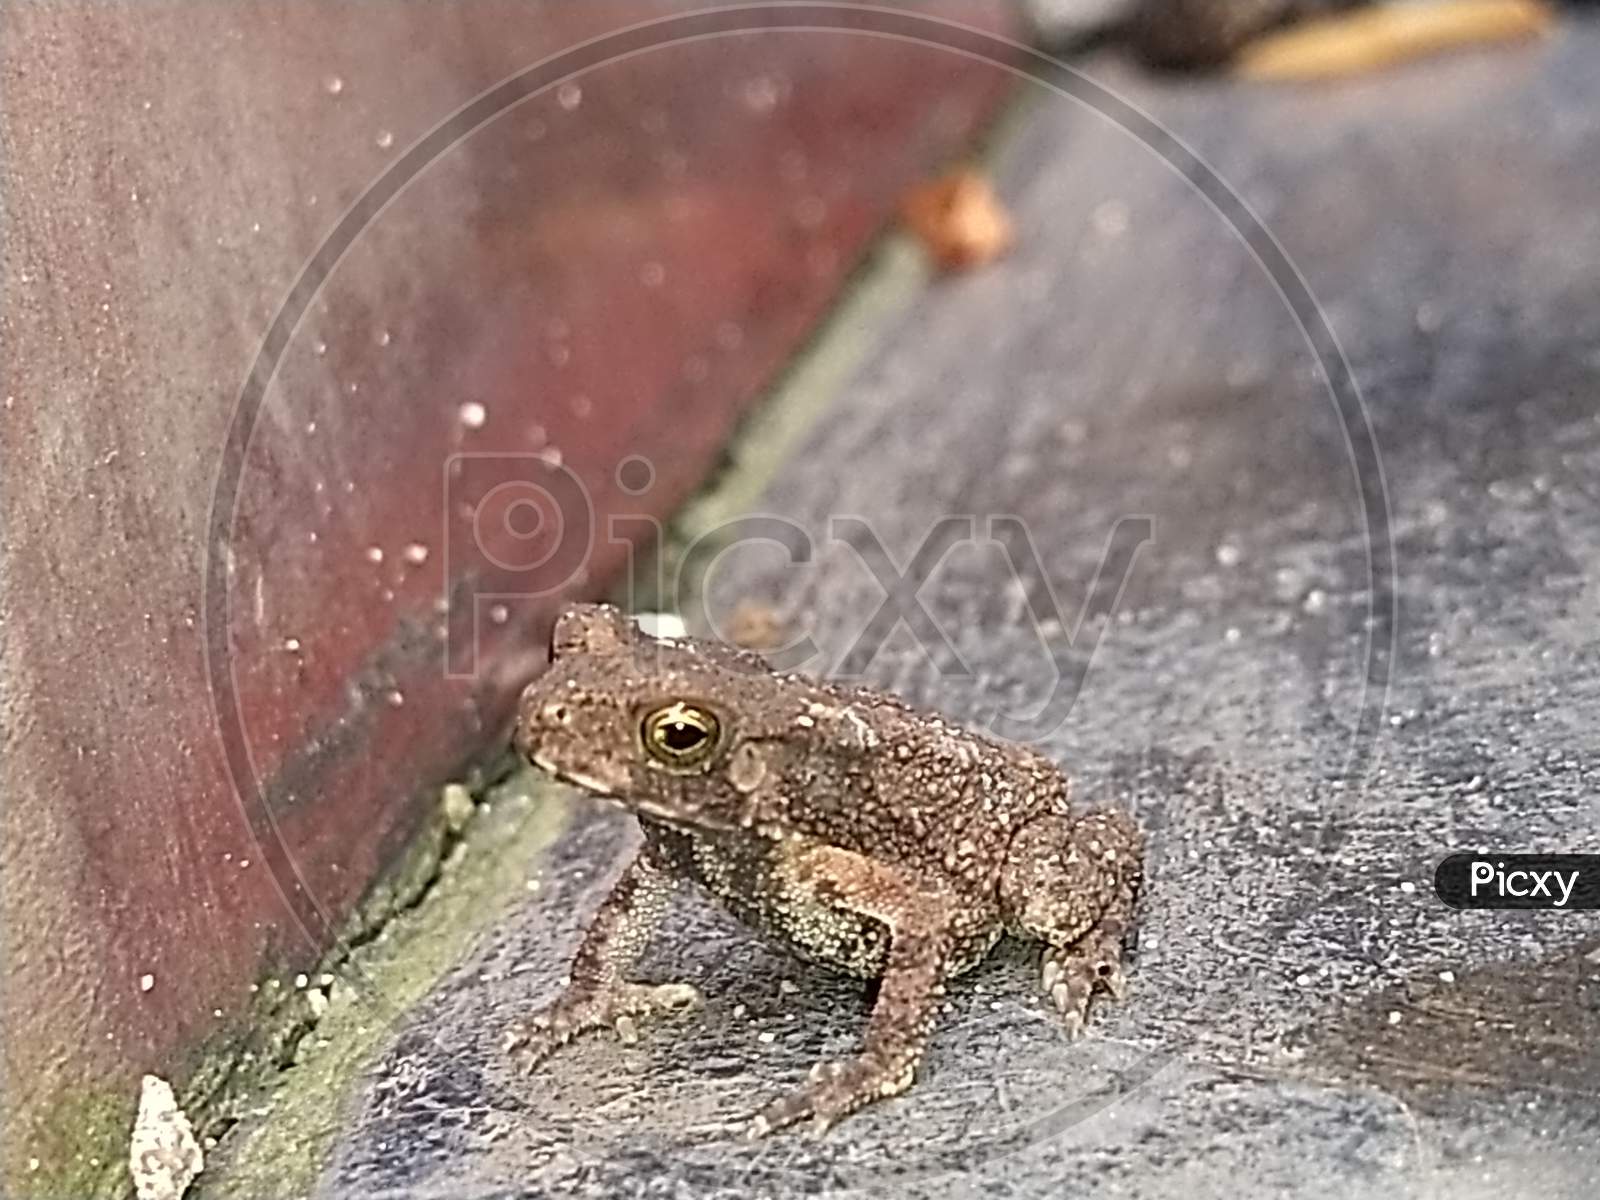 Little toad